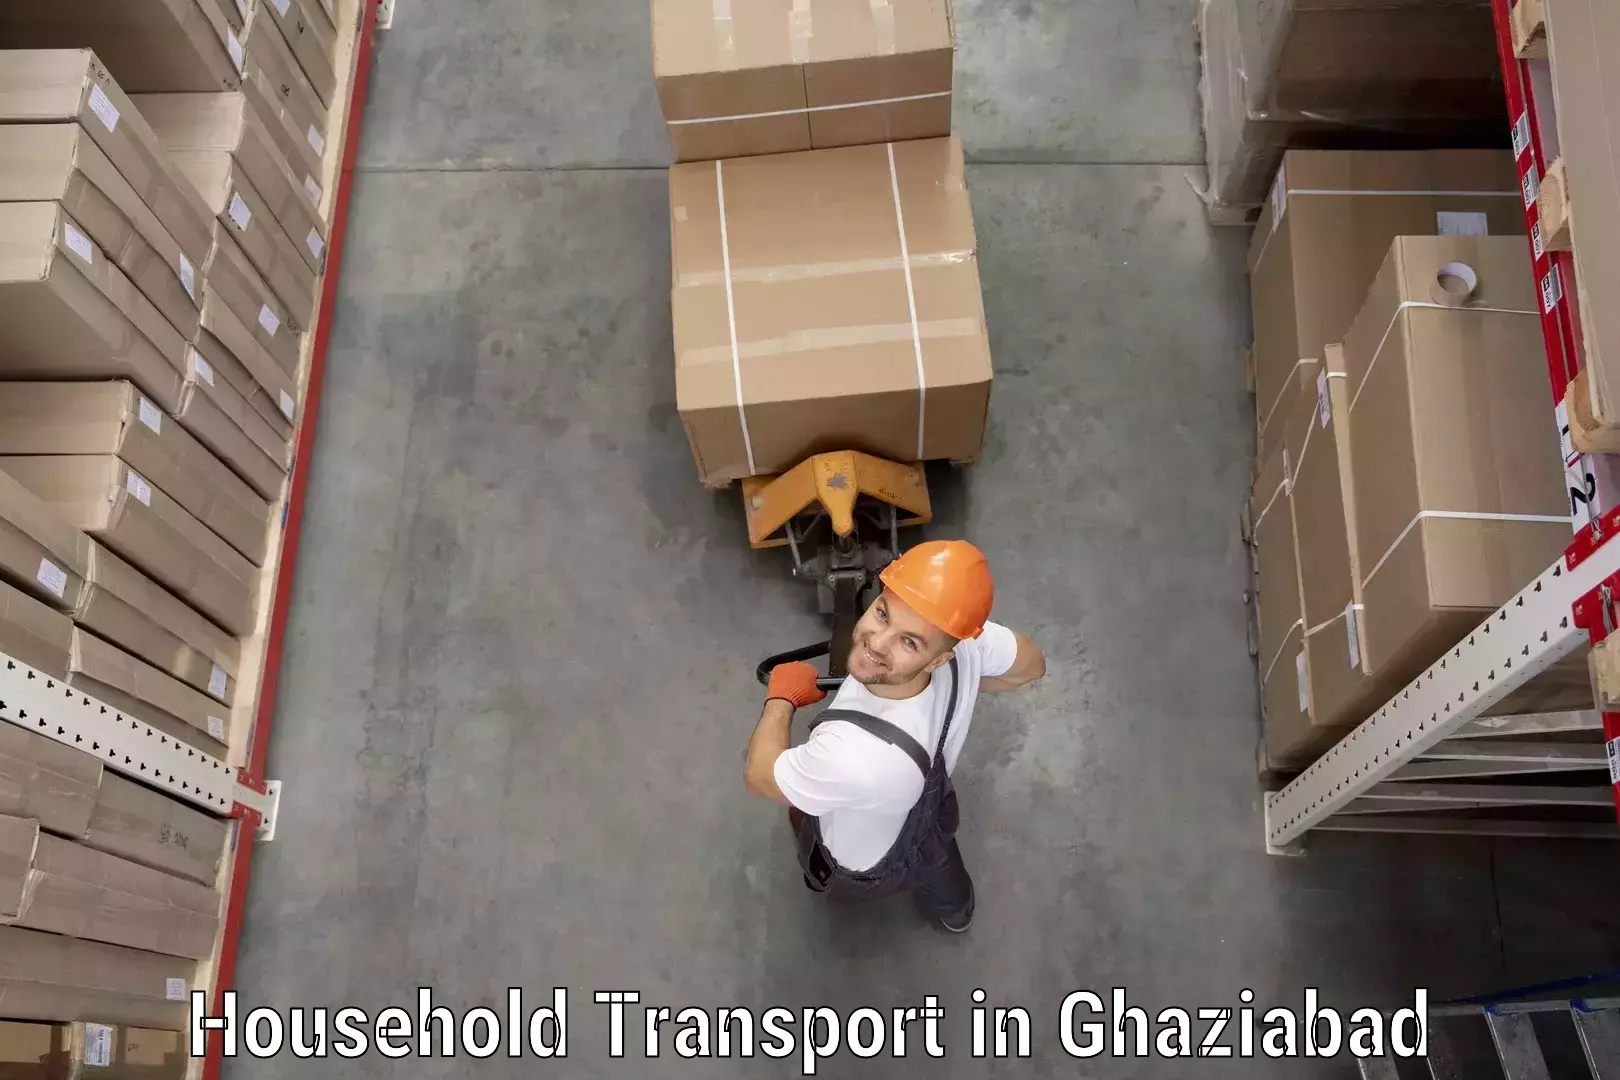 Quality relocation services in Ghaziabad